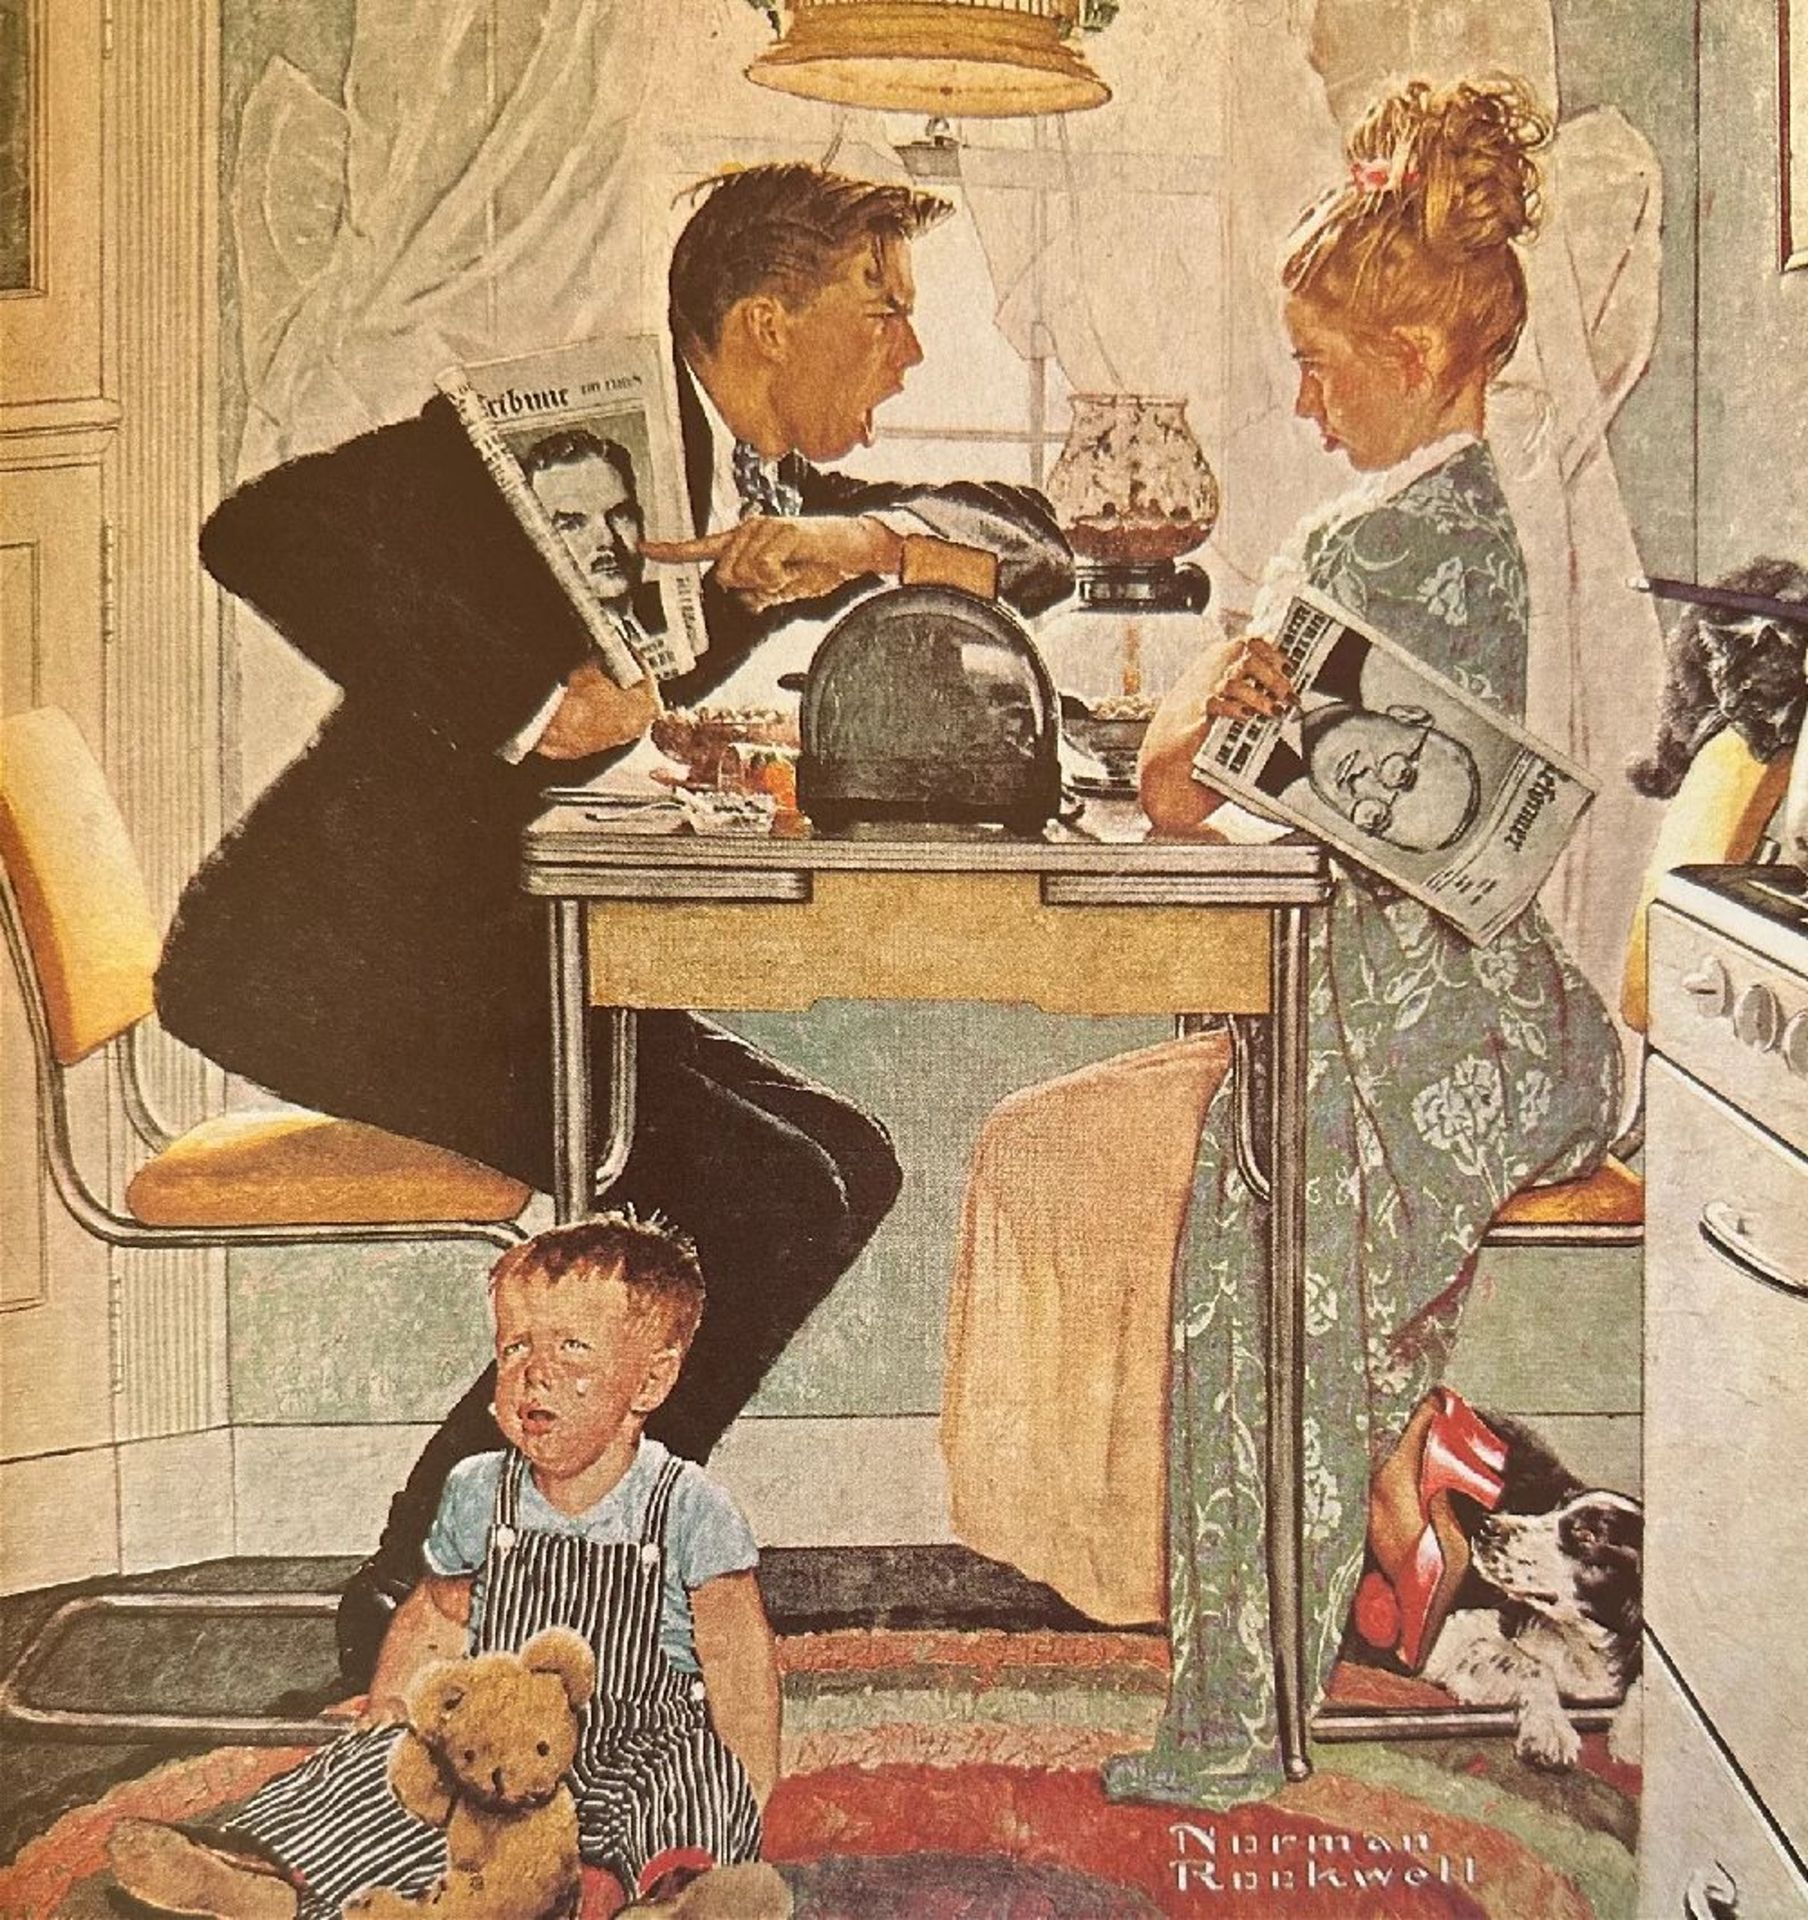 Norman Rockwell "Untitled" Print.